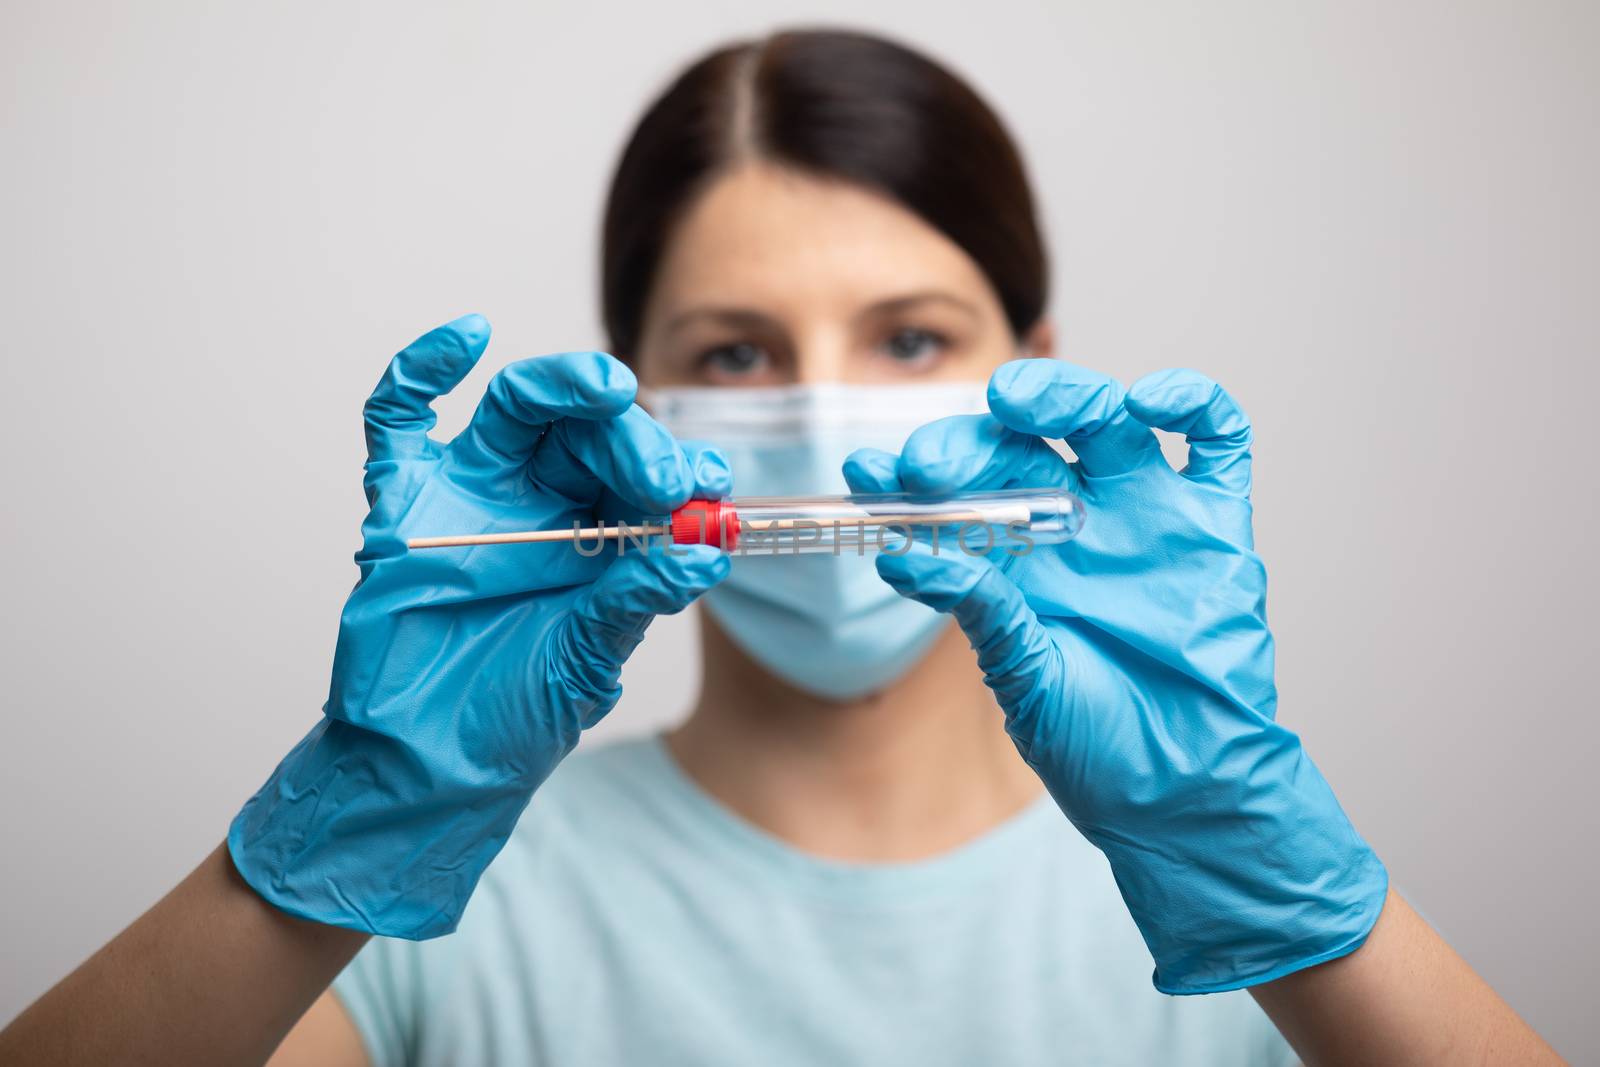 Medical healthcare nurse holding Coronavirus COVID-19 swab test kit, PPE protective mask and gloves, tube for taking OP NP patient specimen sample, PCR DNA RNA testing protocol process stock photo